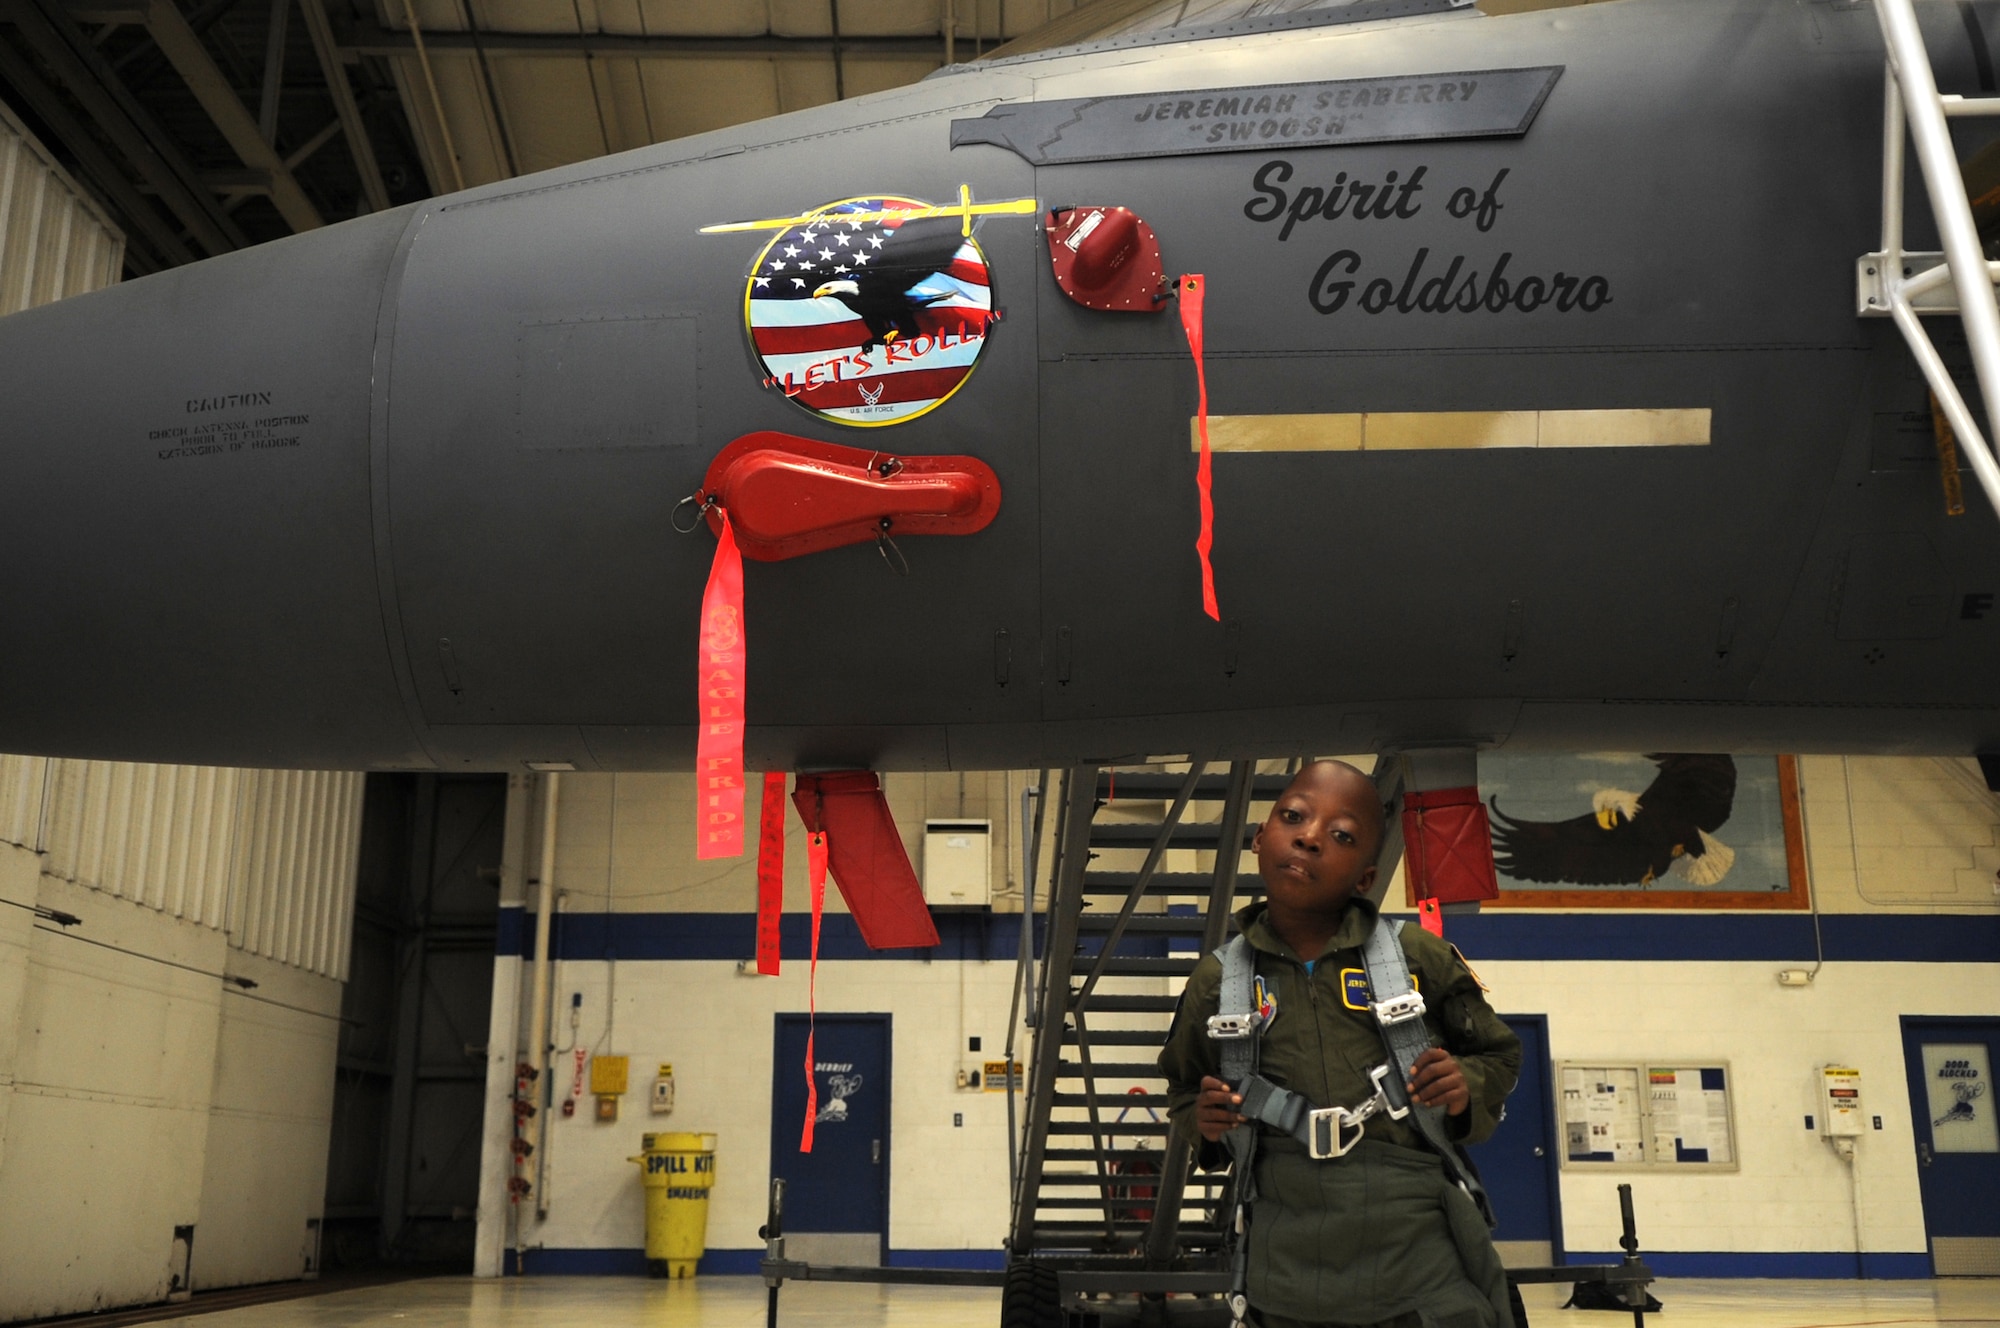 Jeremiah Seaberry, 334th Fighter Squadron pilot for a day, poses in front of “his” F-15E Strike Eagle during a 4th Fighter Wing Pilot for a Day event, April 3, 2015, at Seymour Johnson Air Force Base, North Carolina. Jeremiah’s name and call sign were temporarily placed on the aircraft to mark the special day. (U.S. Air Force photo/Senior Airman Ashley J. Thum)